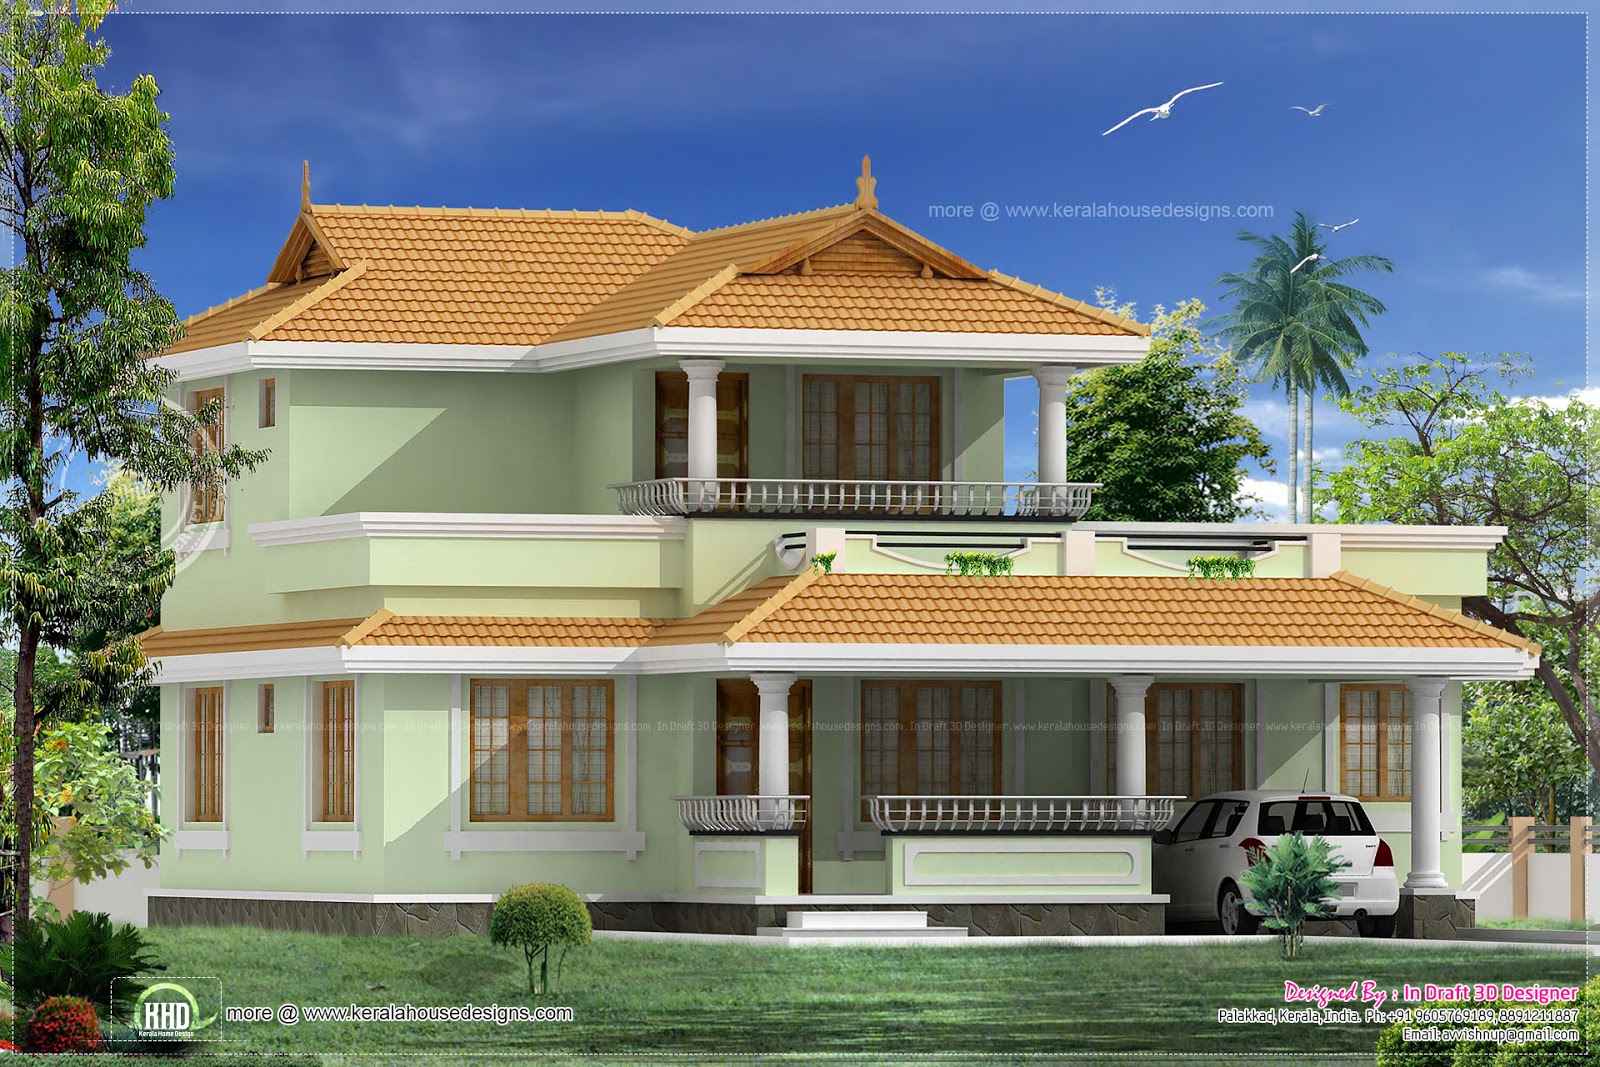 3 Bed room Kerala  traditional villa in 1754 sqft House  